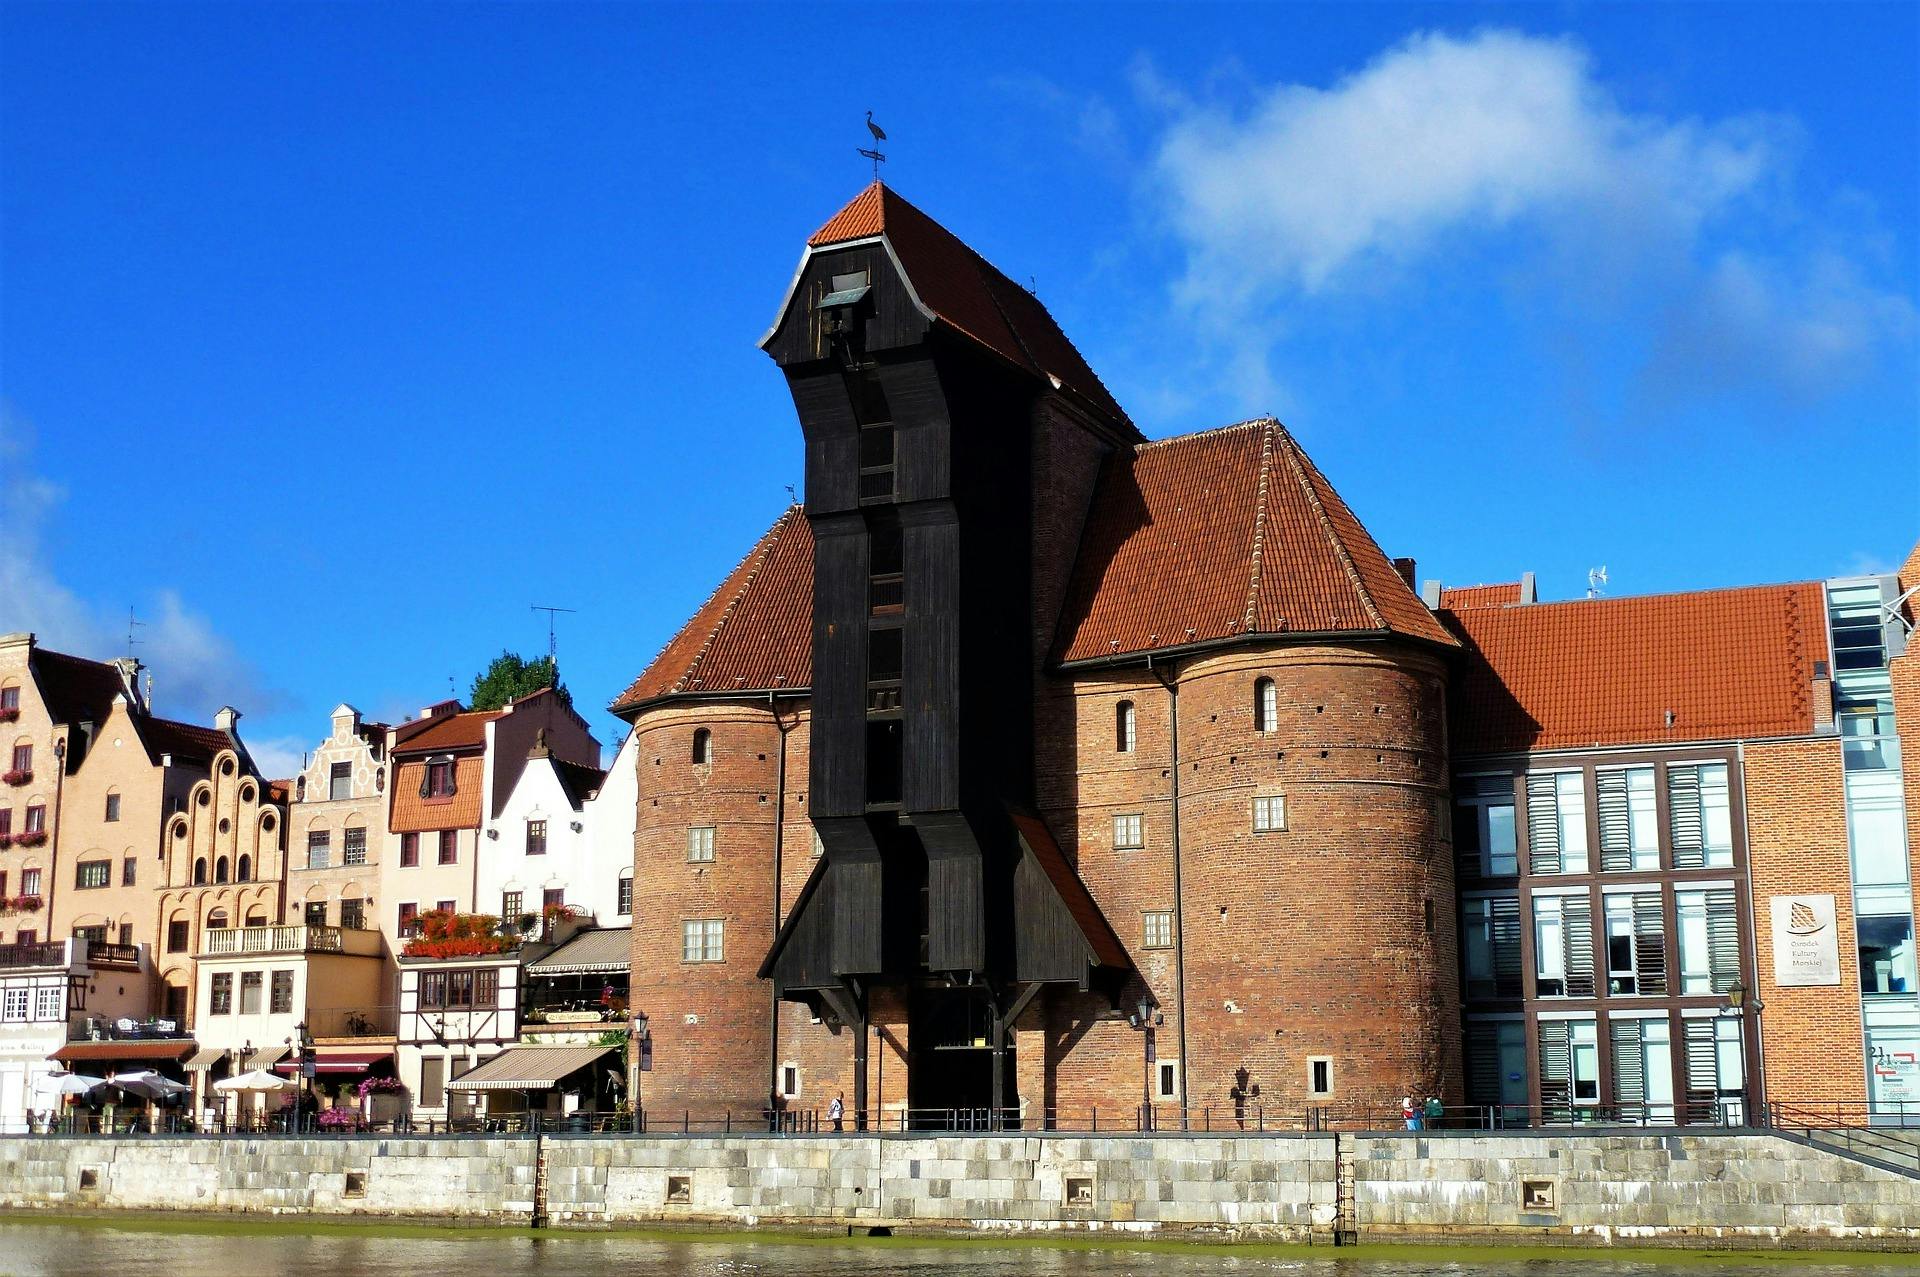 Self-guided tour of Gdansk by Audio Guide Gdansk 1